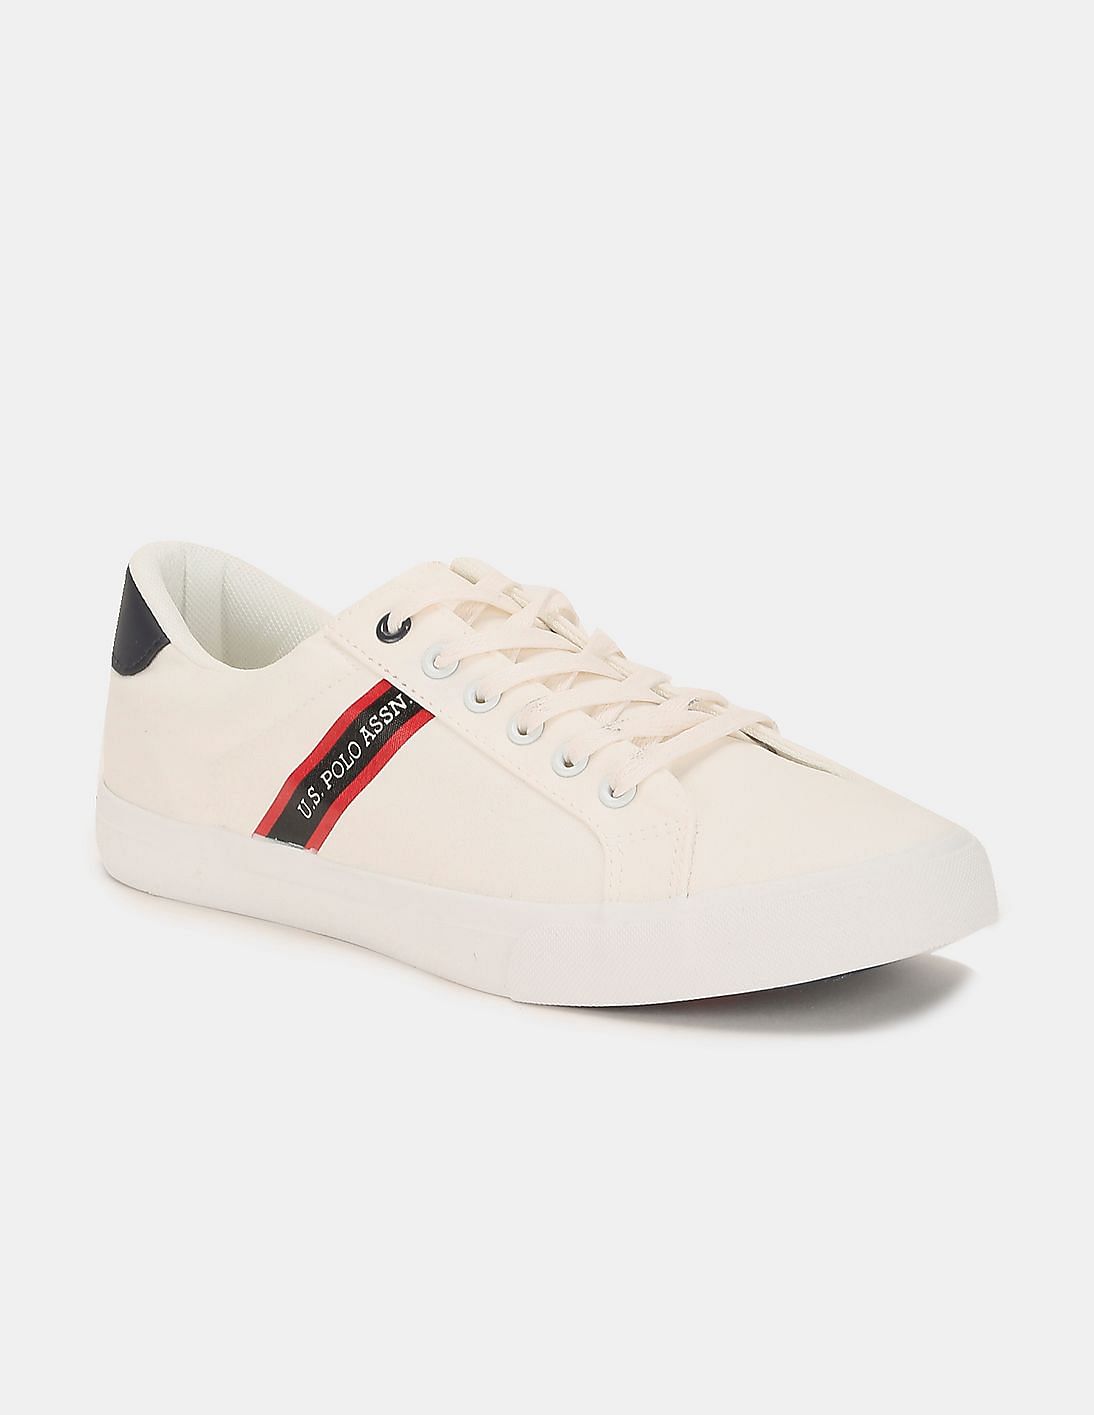 Buy U.S. Polo Assn. Round Toe Lace Up Gaiman 2.0 Sneakers - NNNOW.com